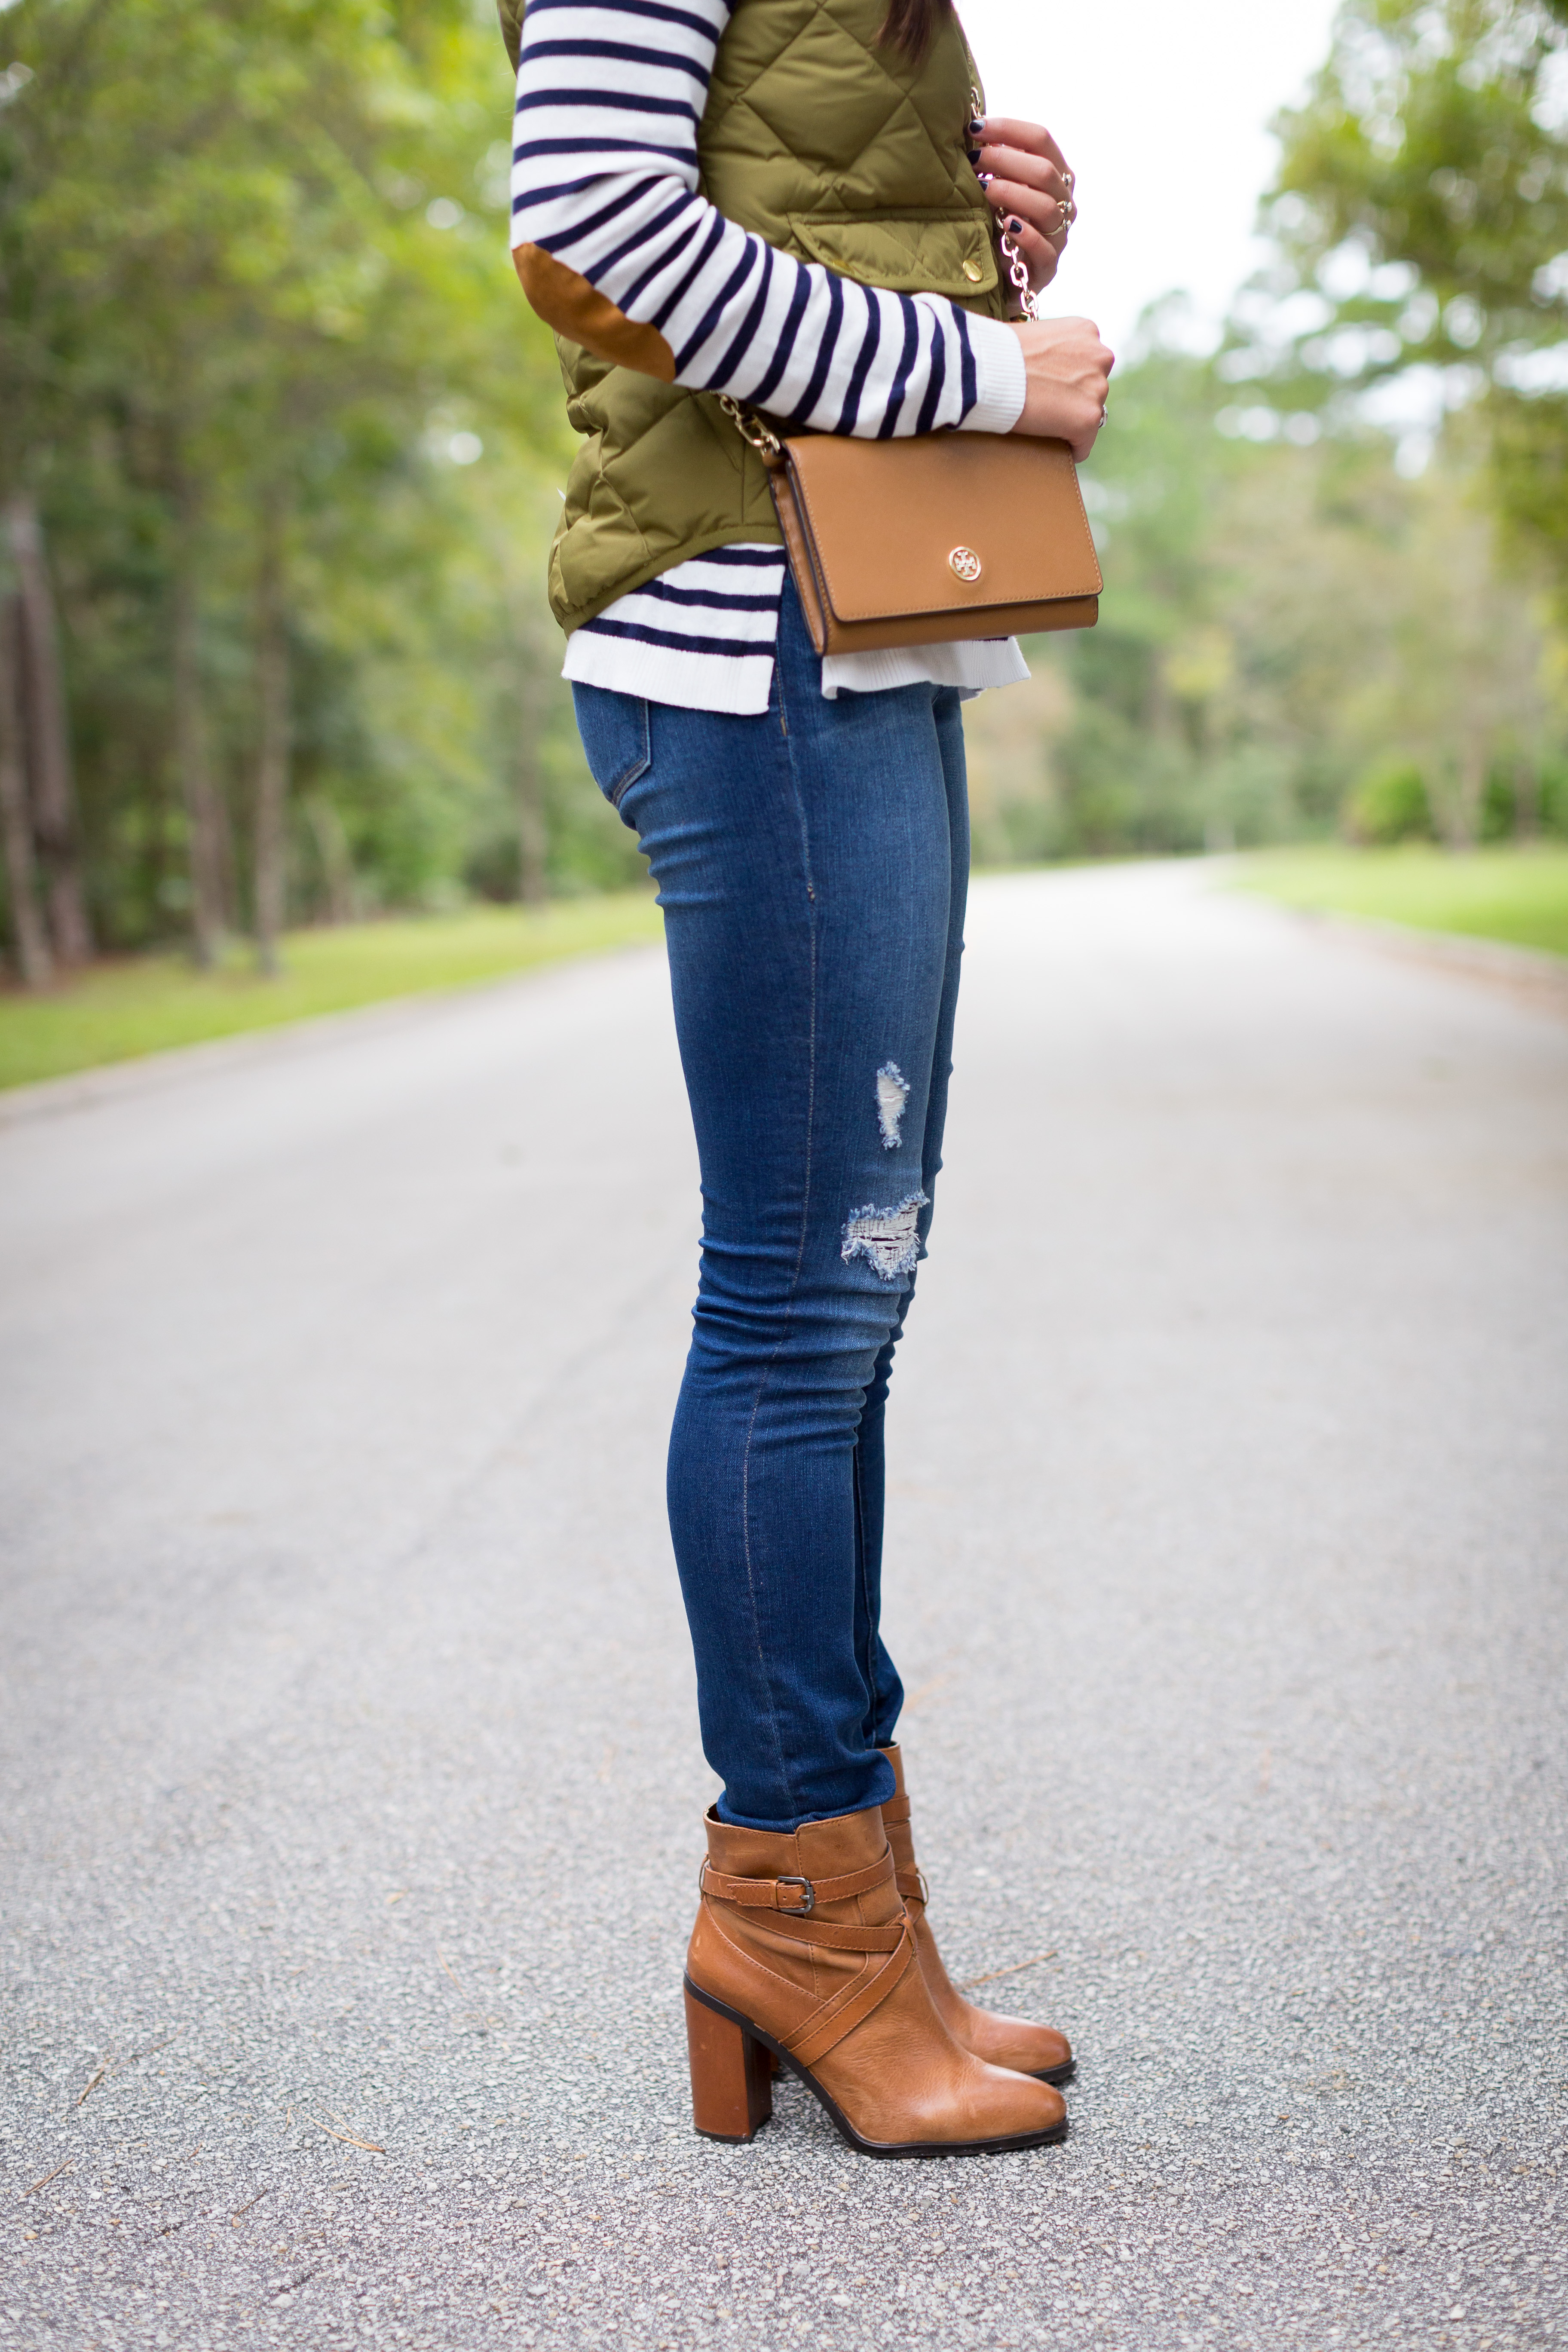 stripe tee, elbow patches, elbow patch sweater, stripe sweater, distressed skinny jeans, excursion vest, tory burch wallet on a chain, brown booties, fall fashion, preppy fall outfit // grace wainwright from a southern drawl